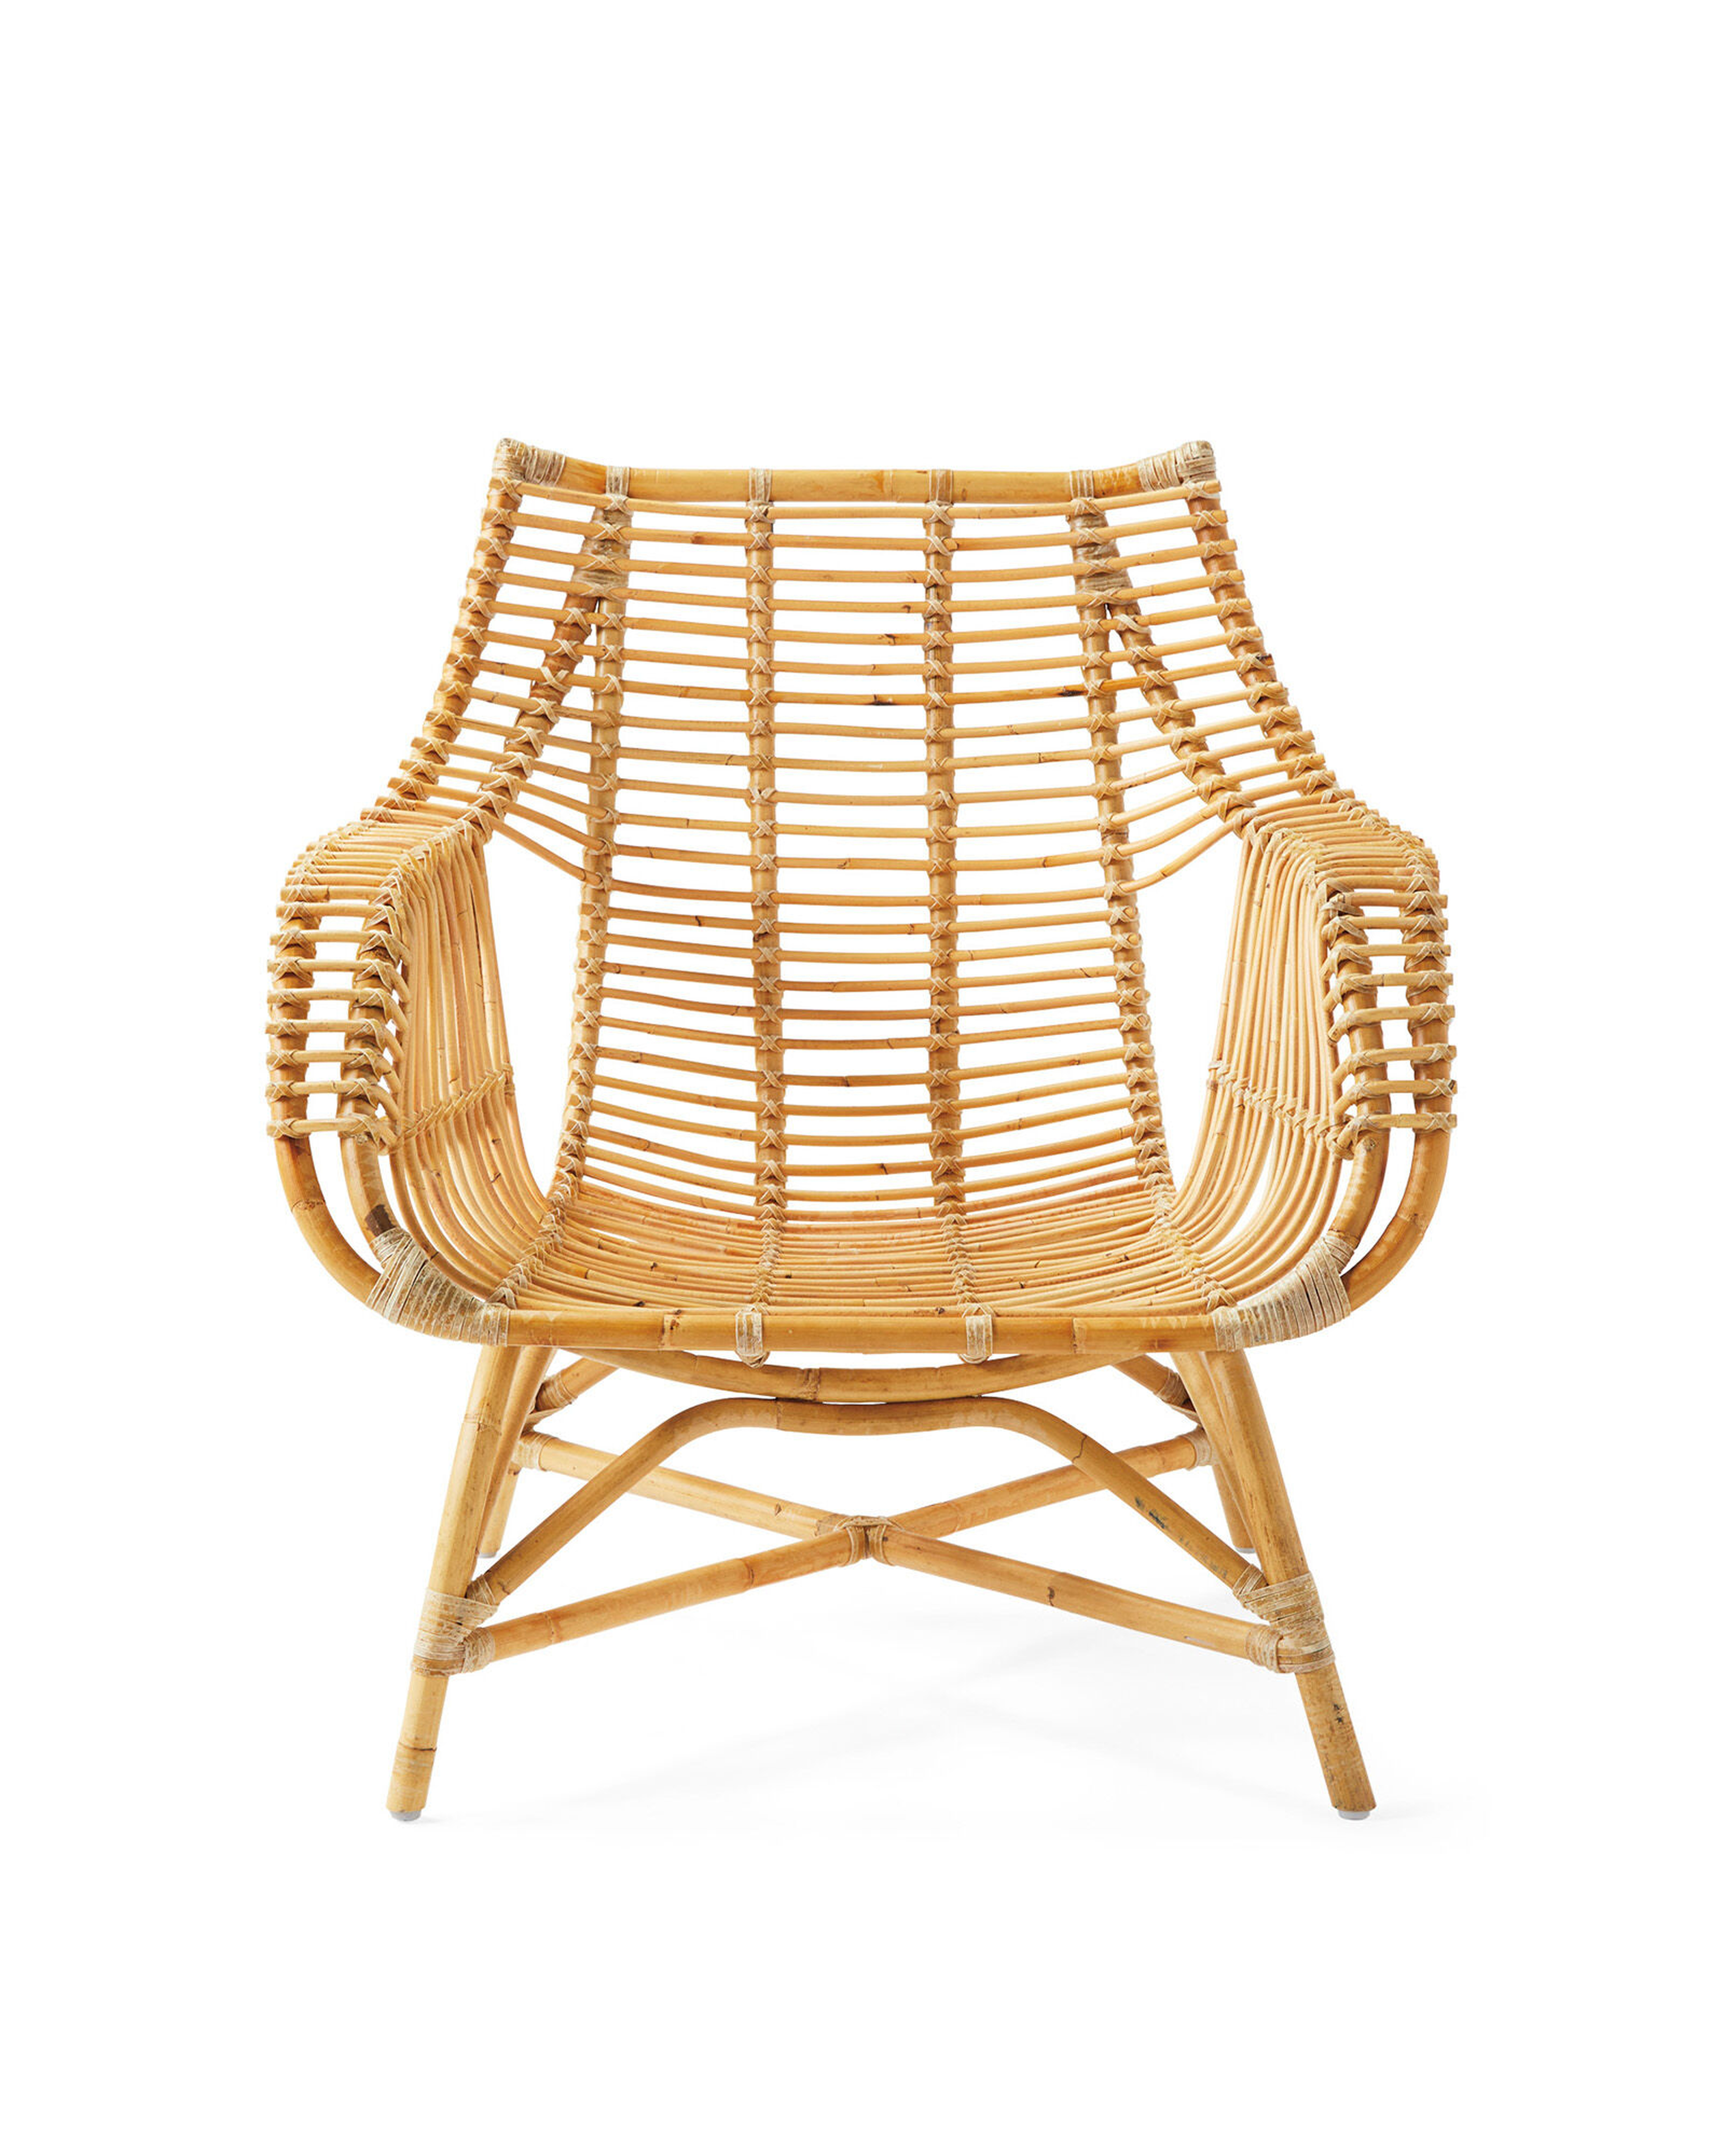 Venice Rattan Chair - Serena and Lily